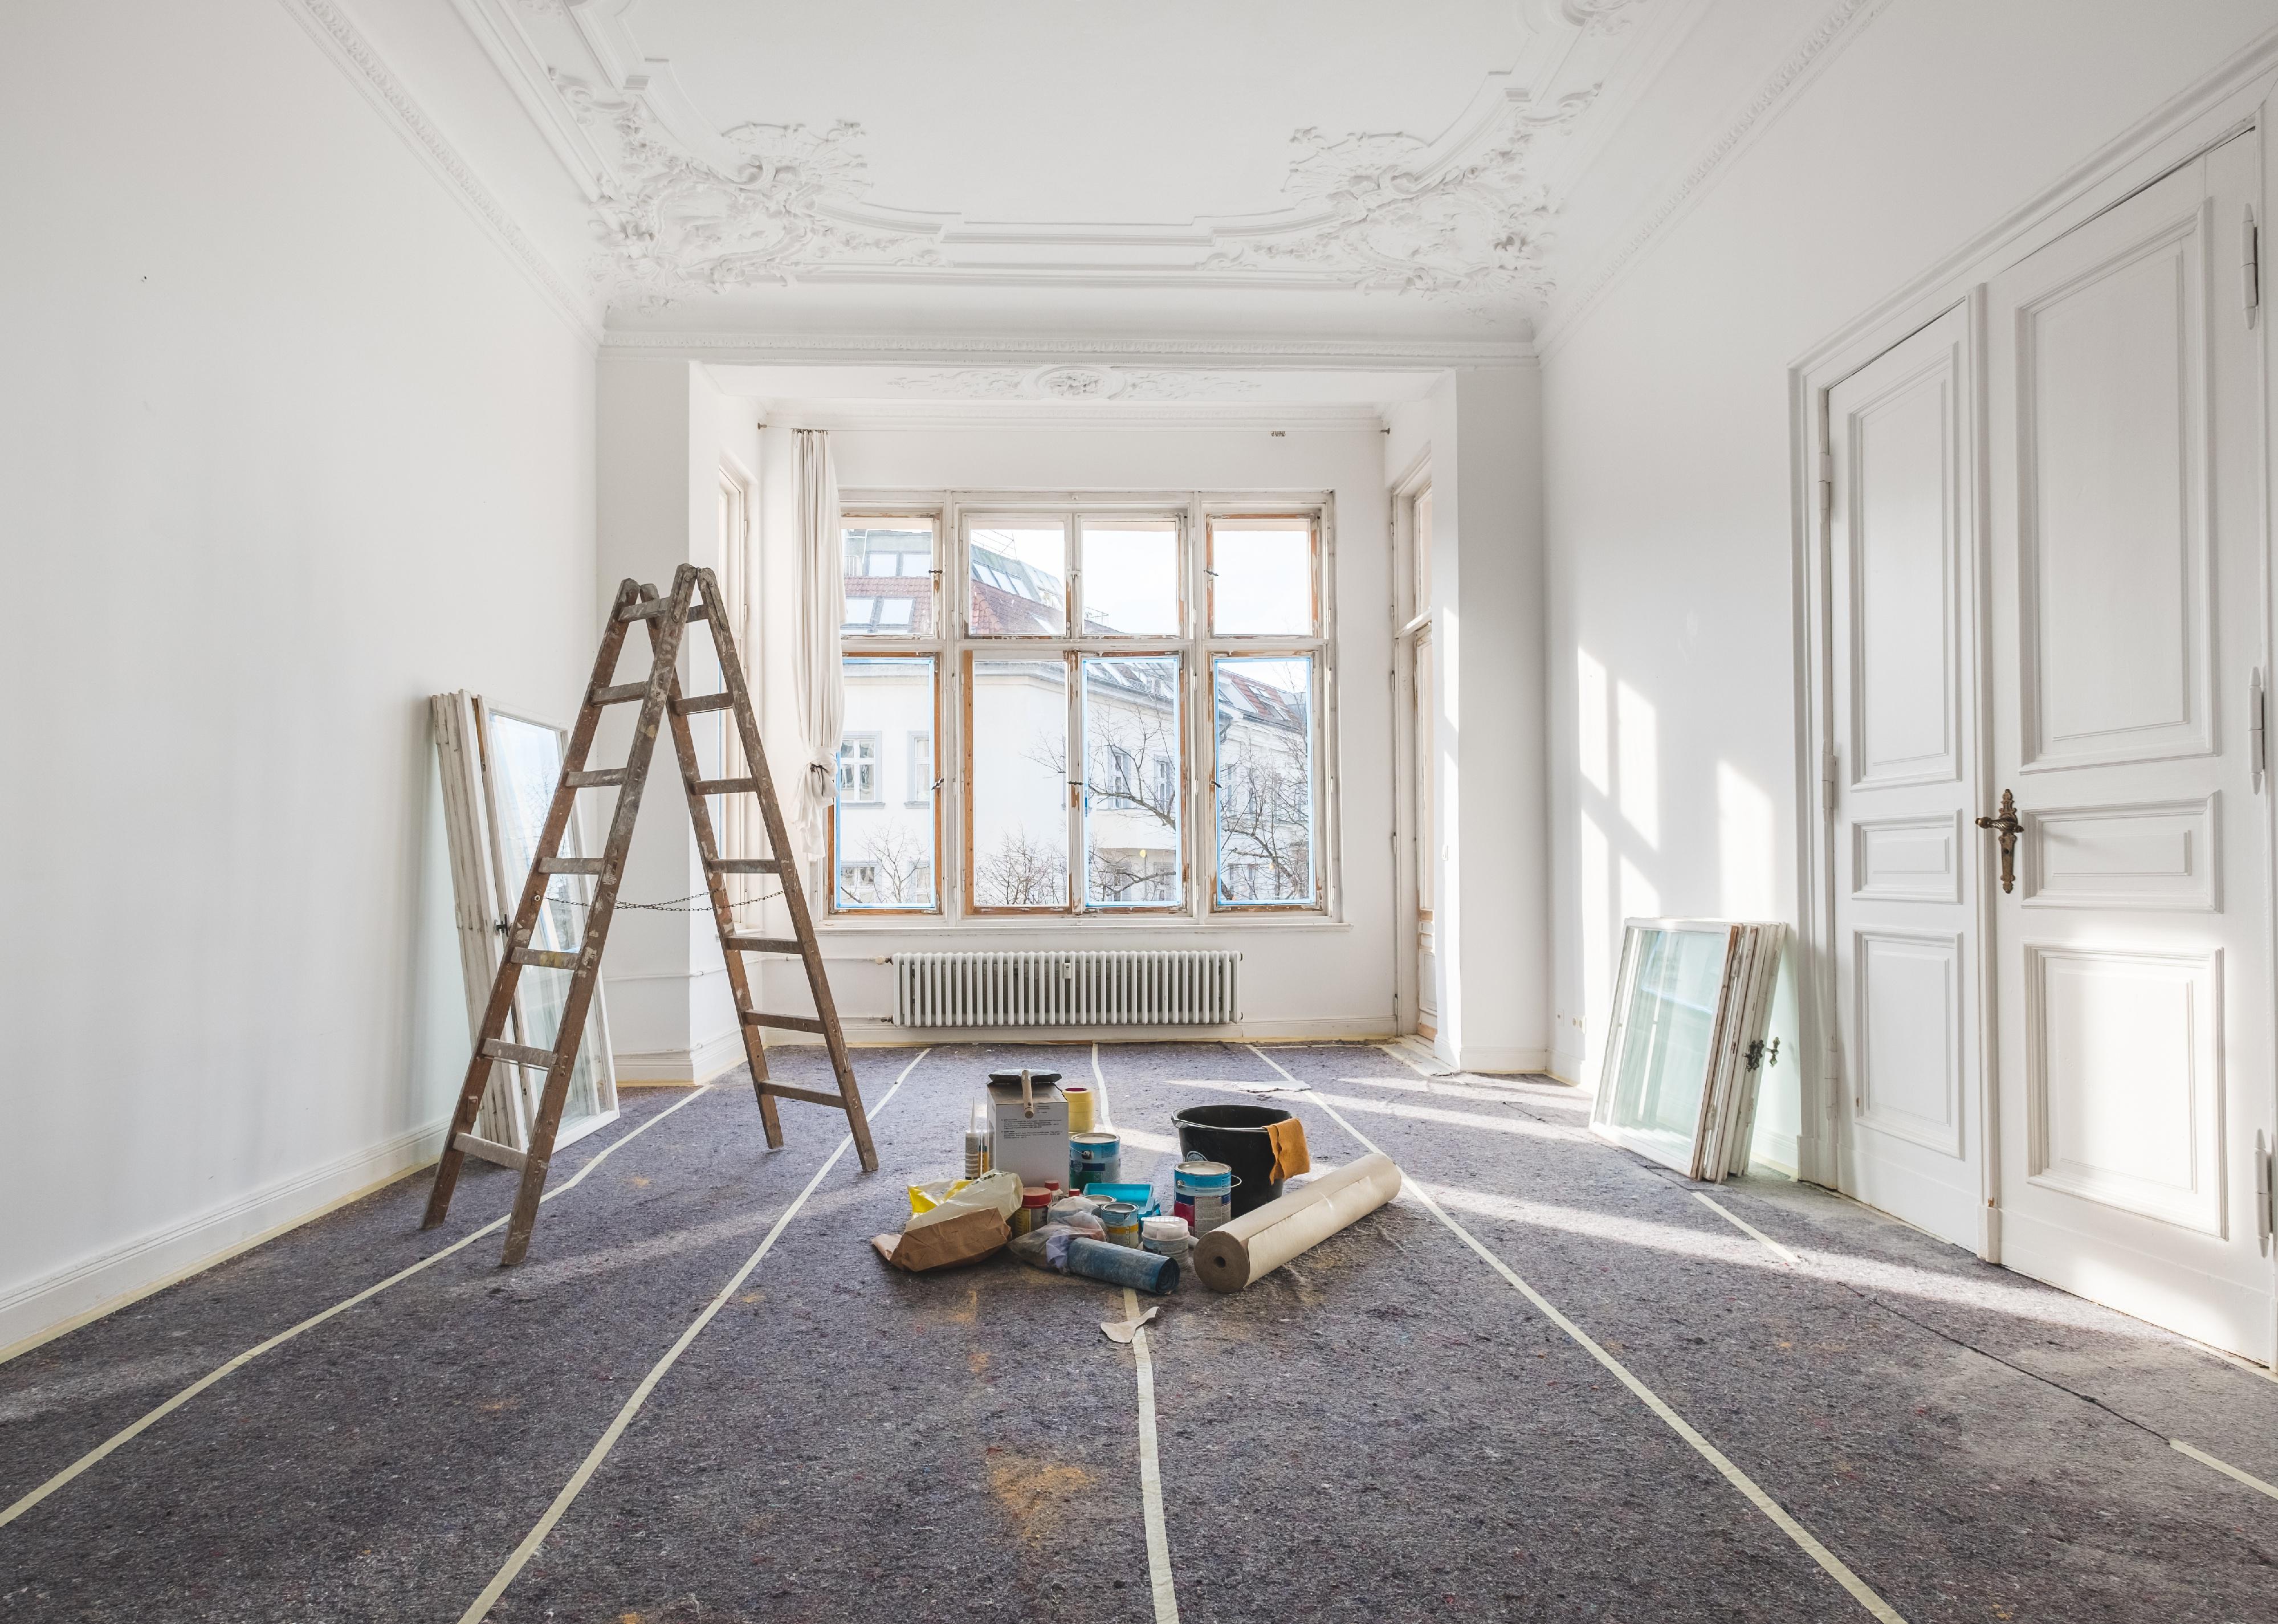 A vacant home filled with a ladder and paint supplies for renovation